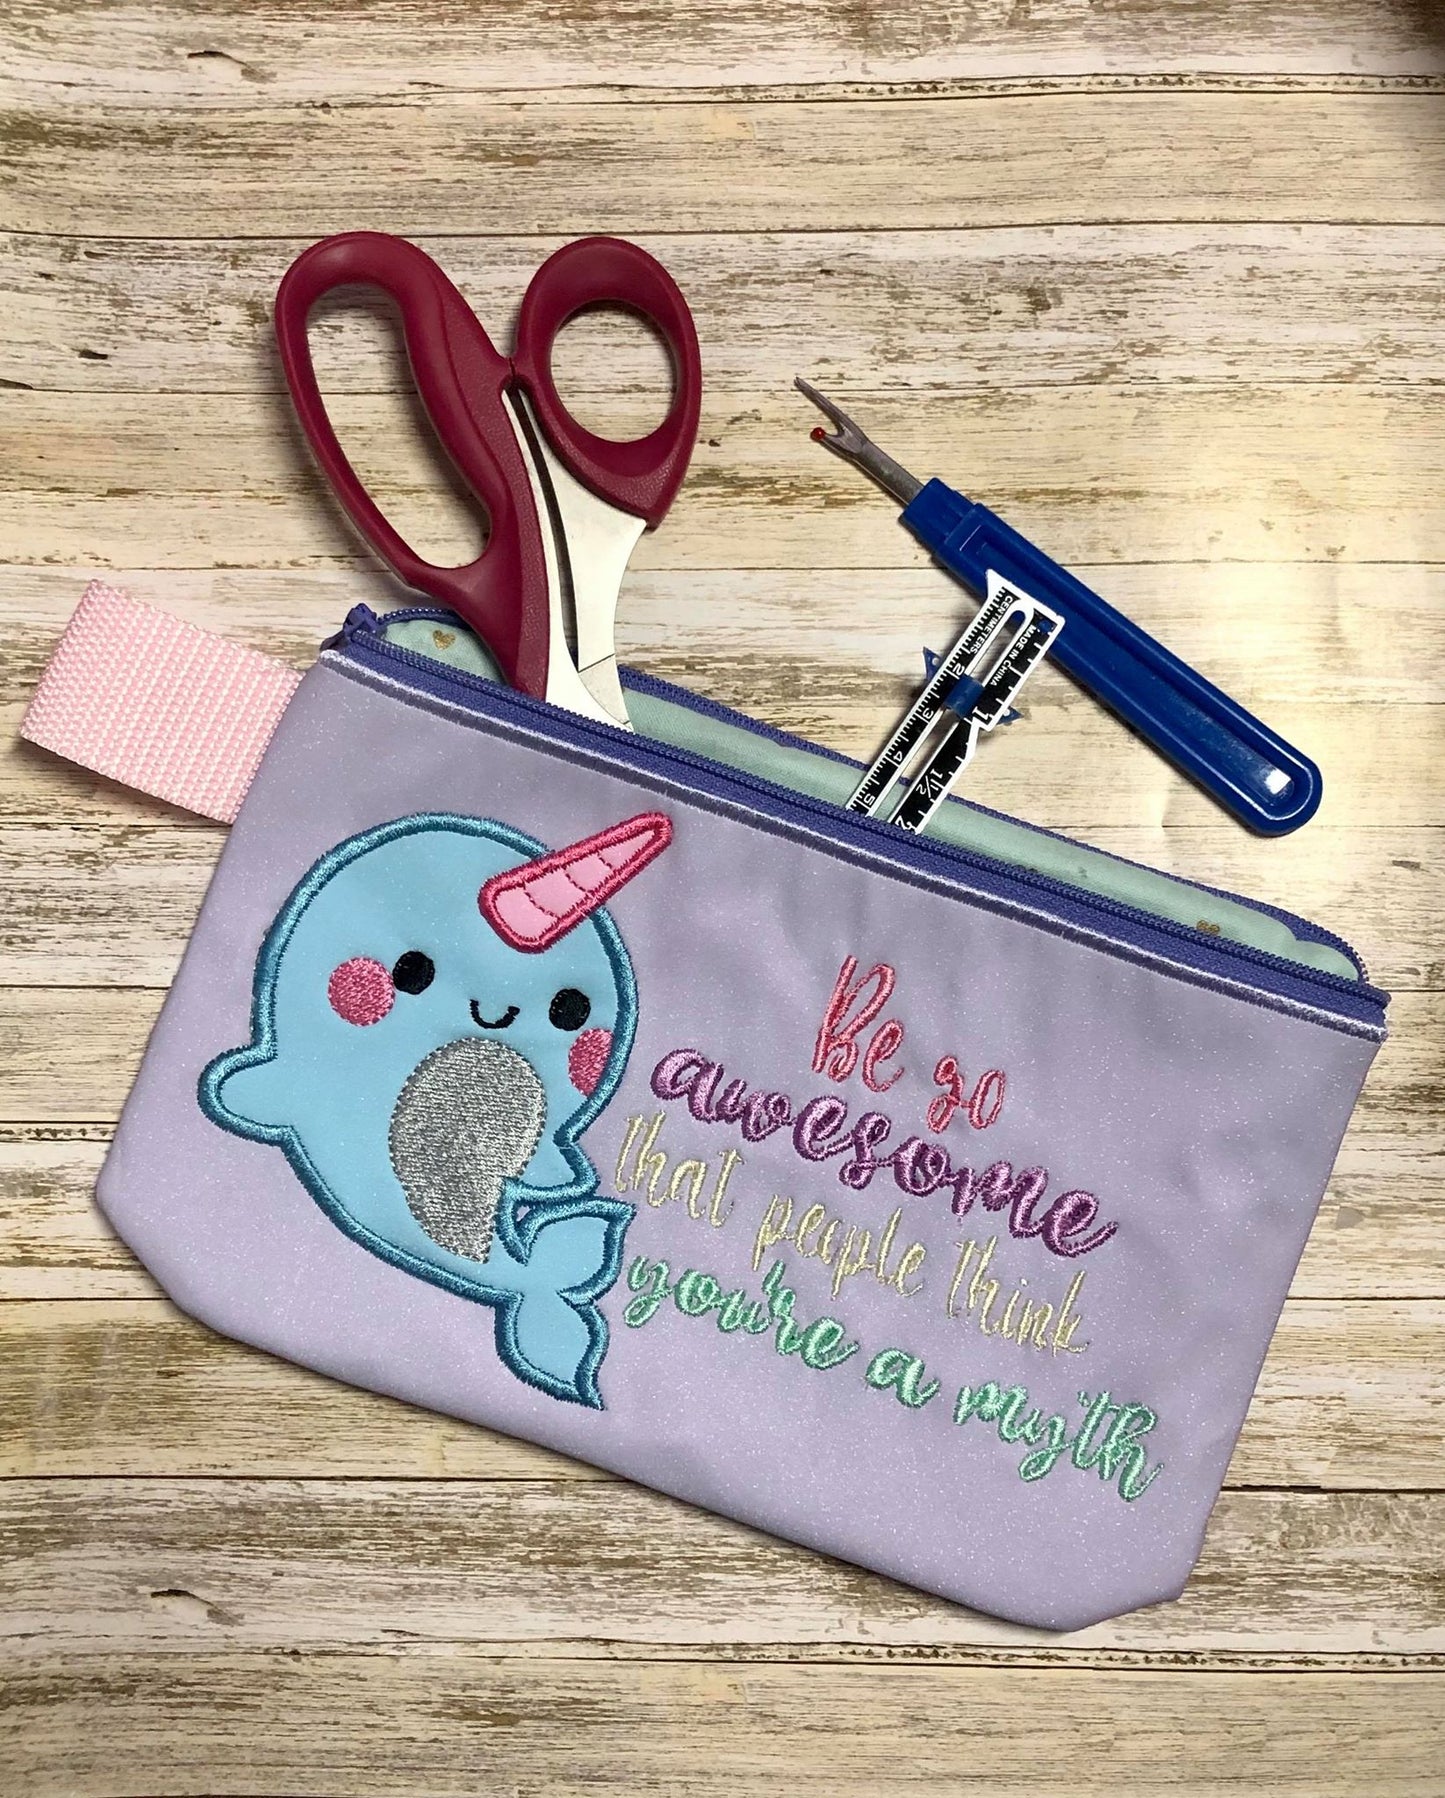 Be so awesome narwhal Zipper Bag - 2 sizes - Digital Embroidery Design